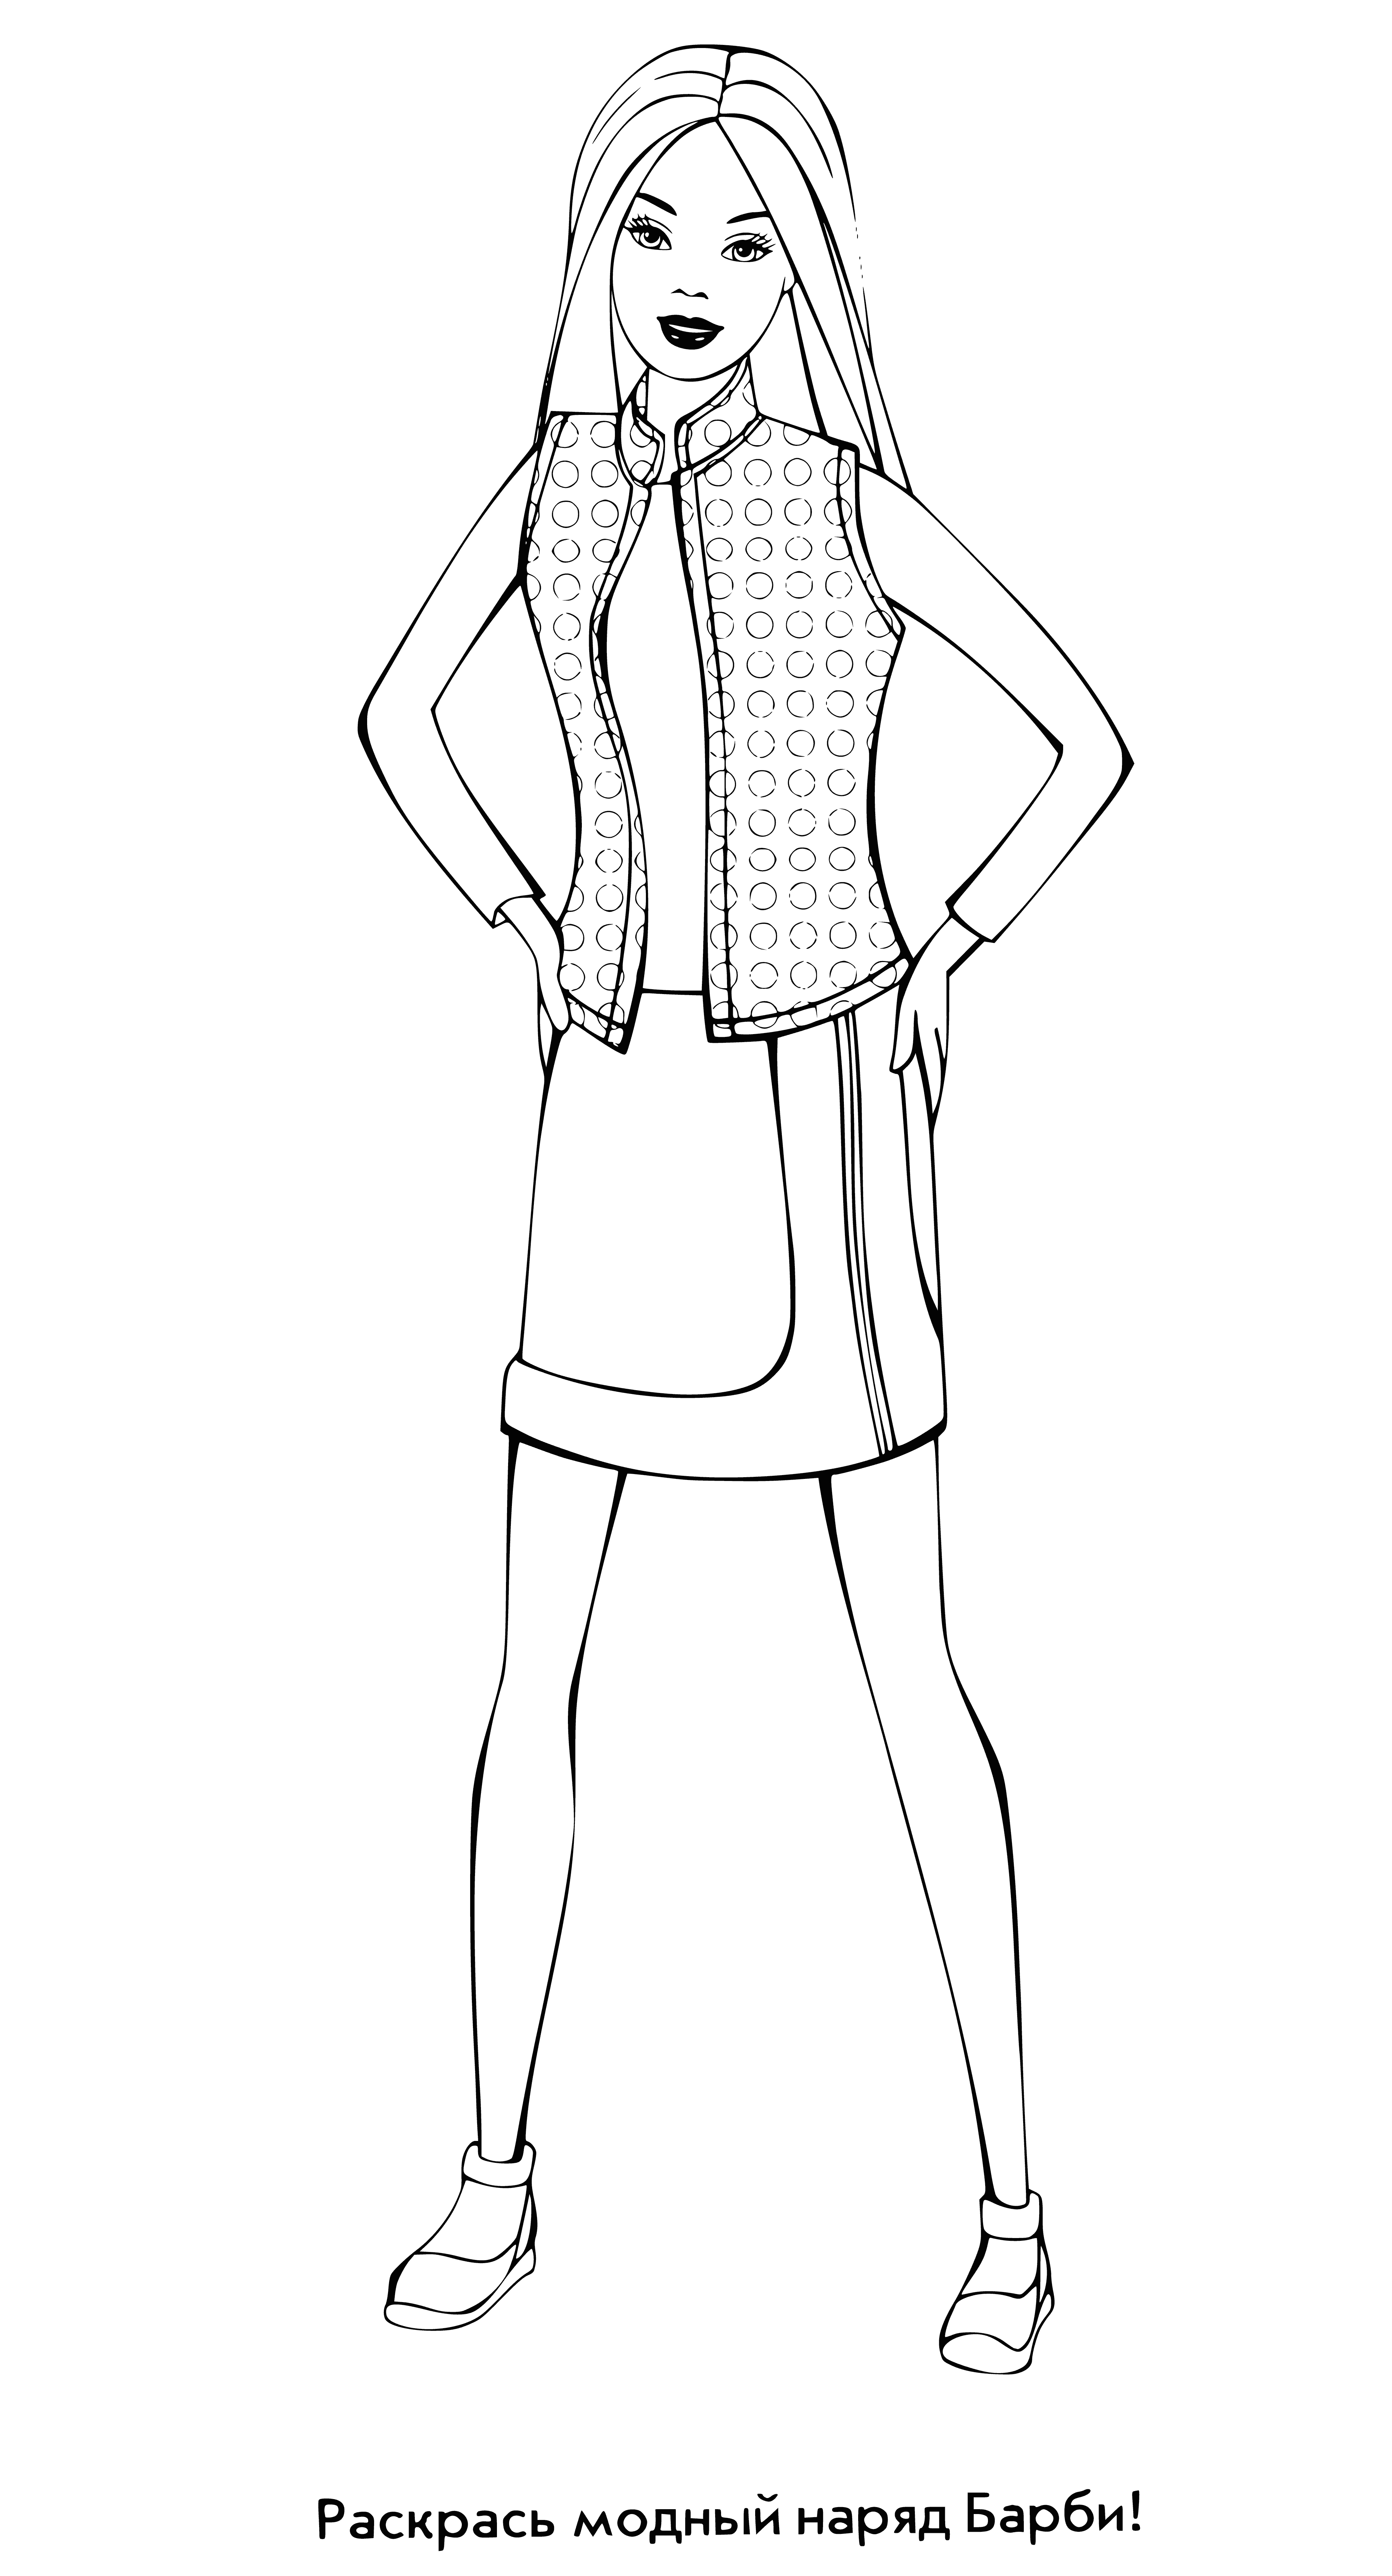 coloring page: Barbie in light blue dress w/ white dots, white collar & blonde ponytail; blue eyes & light blue background.